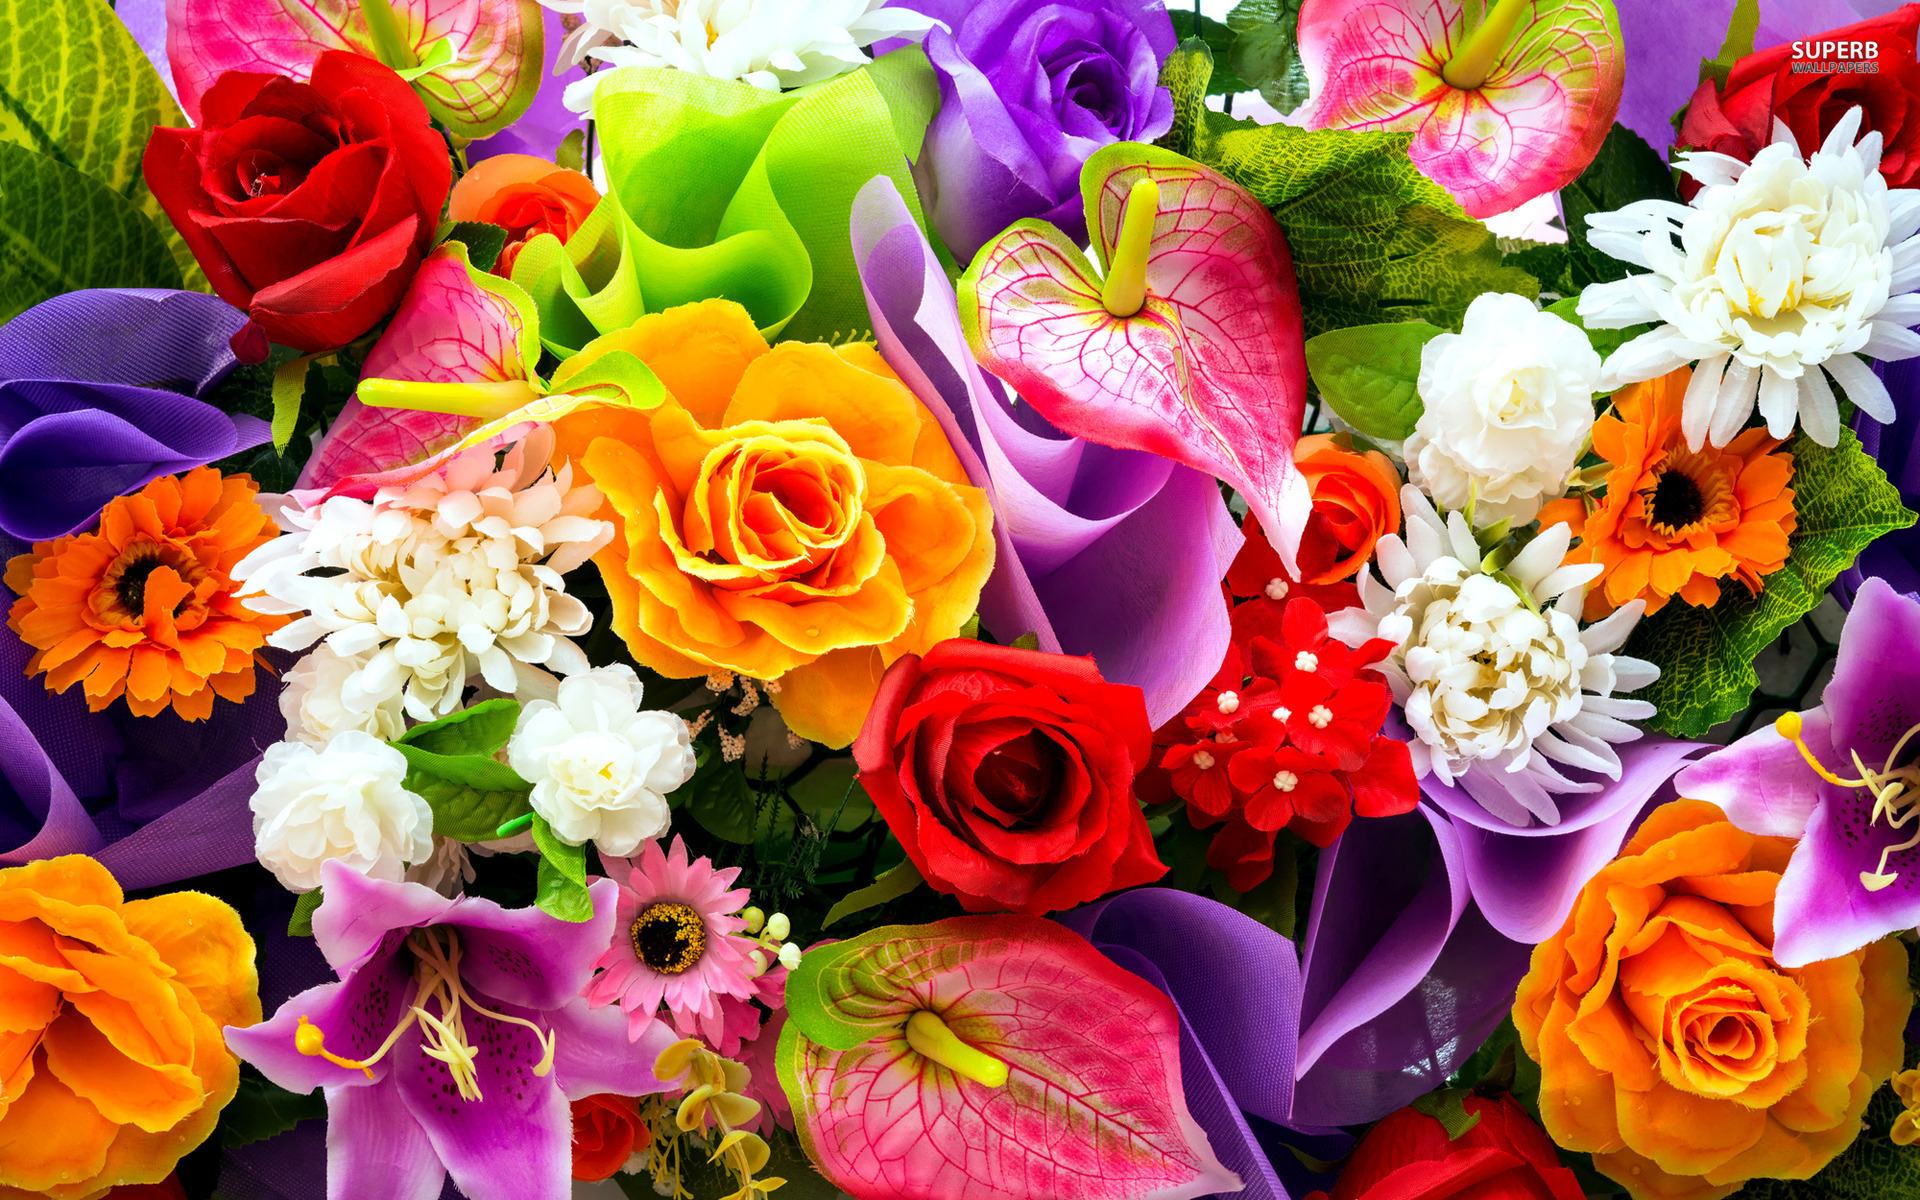 Images of colorful flowers   RR collections